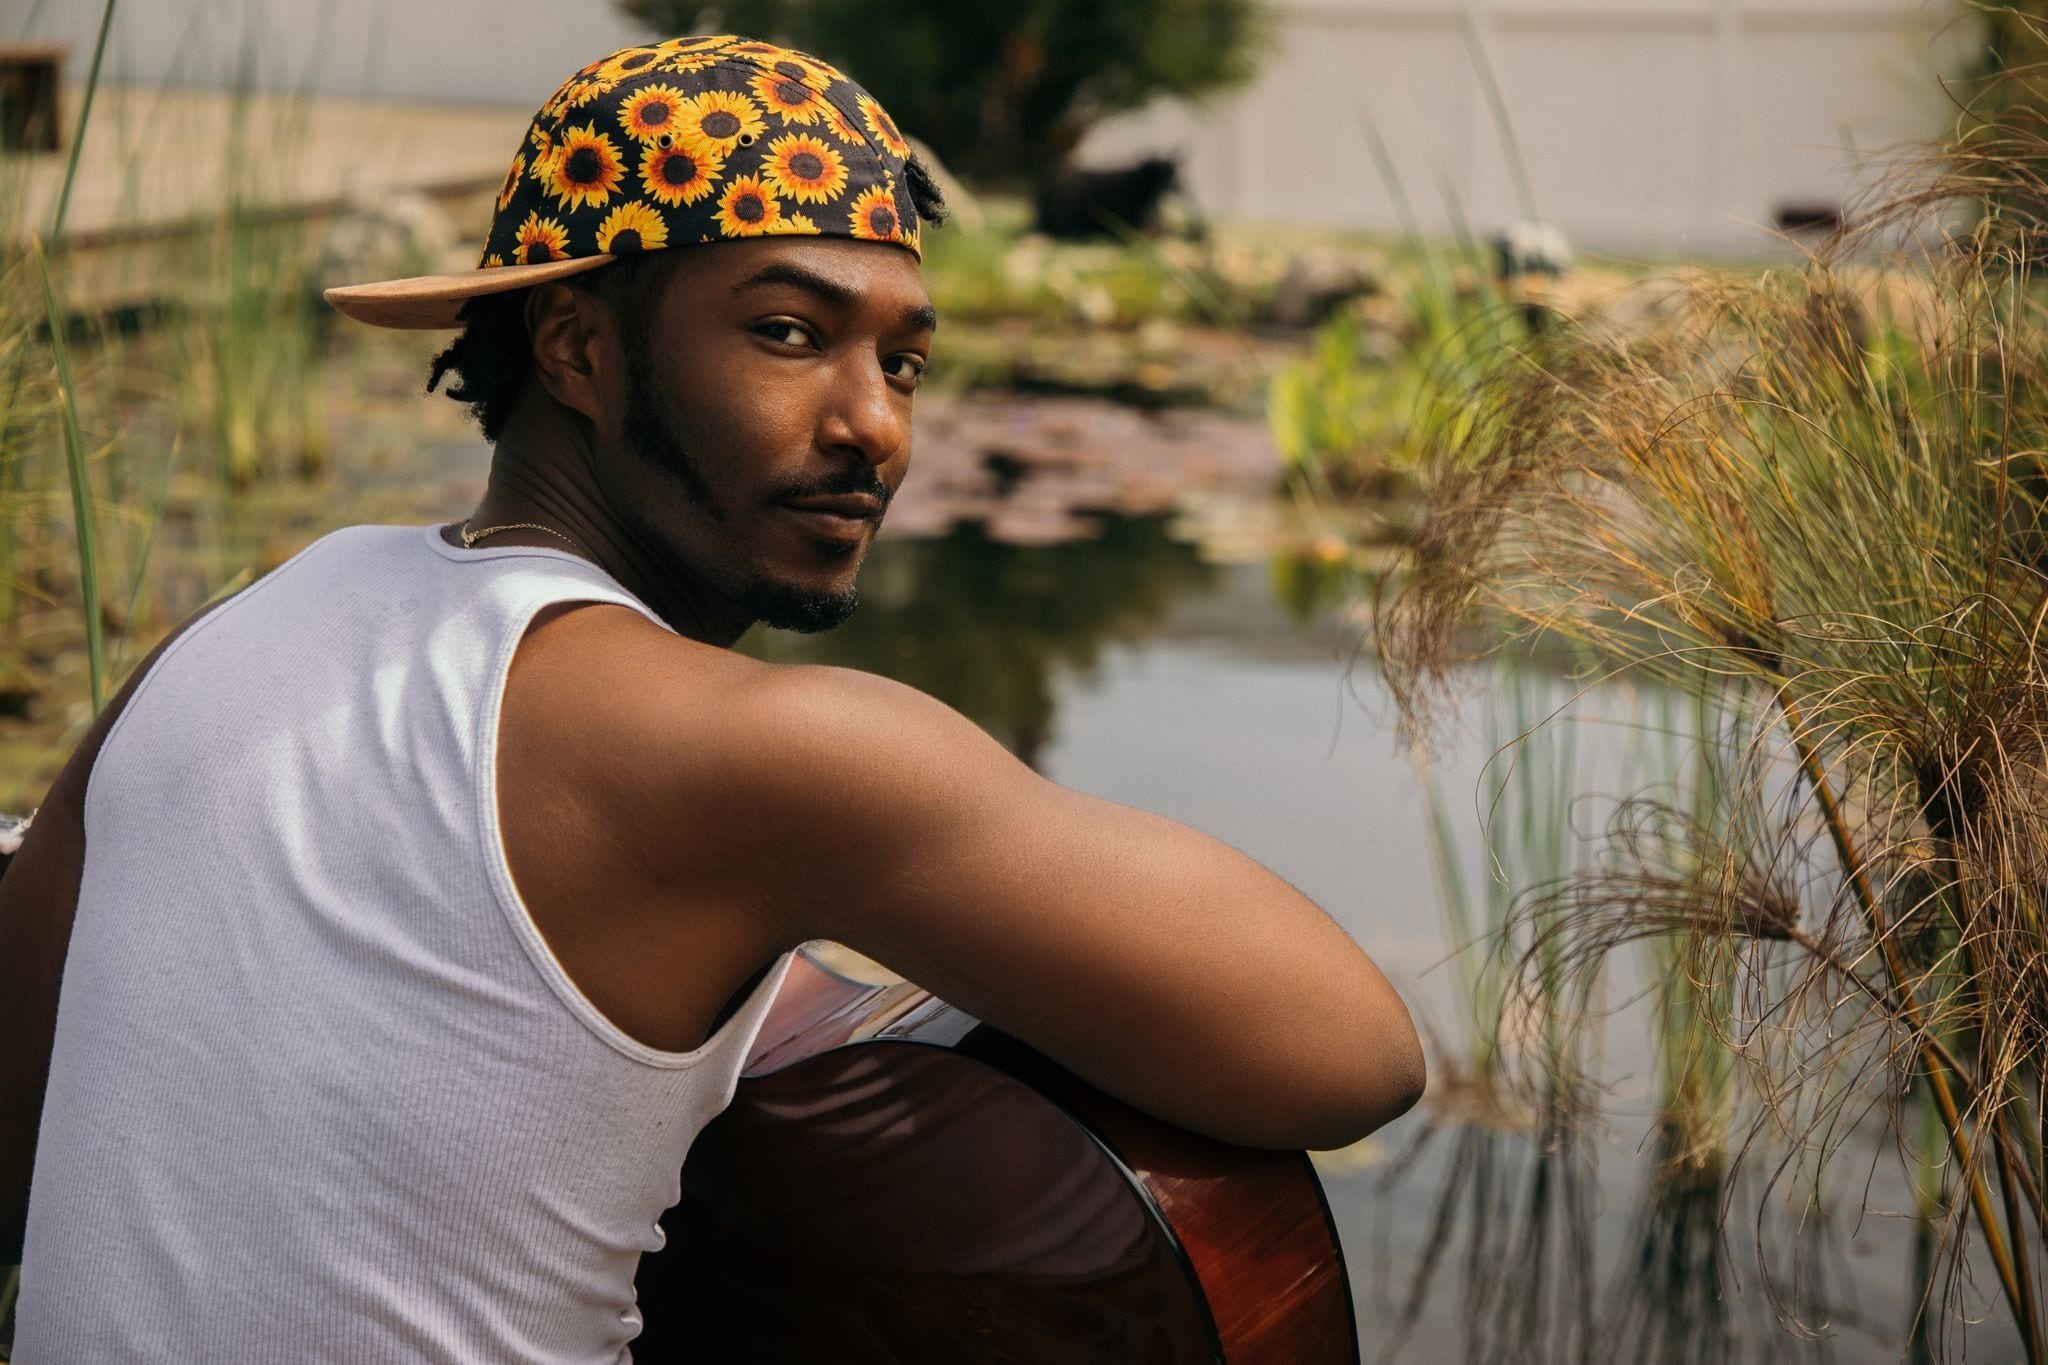 Willie Jones Blends Country-Trap With Classic Banjo-Picking on “Trainwreck” (premiere)